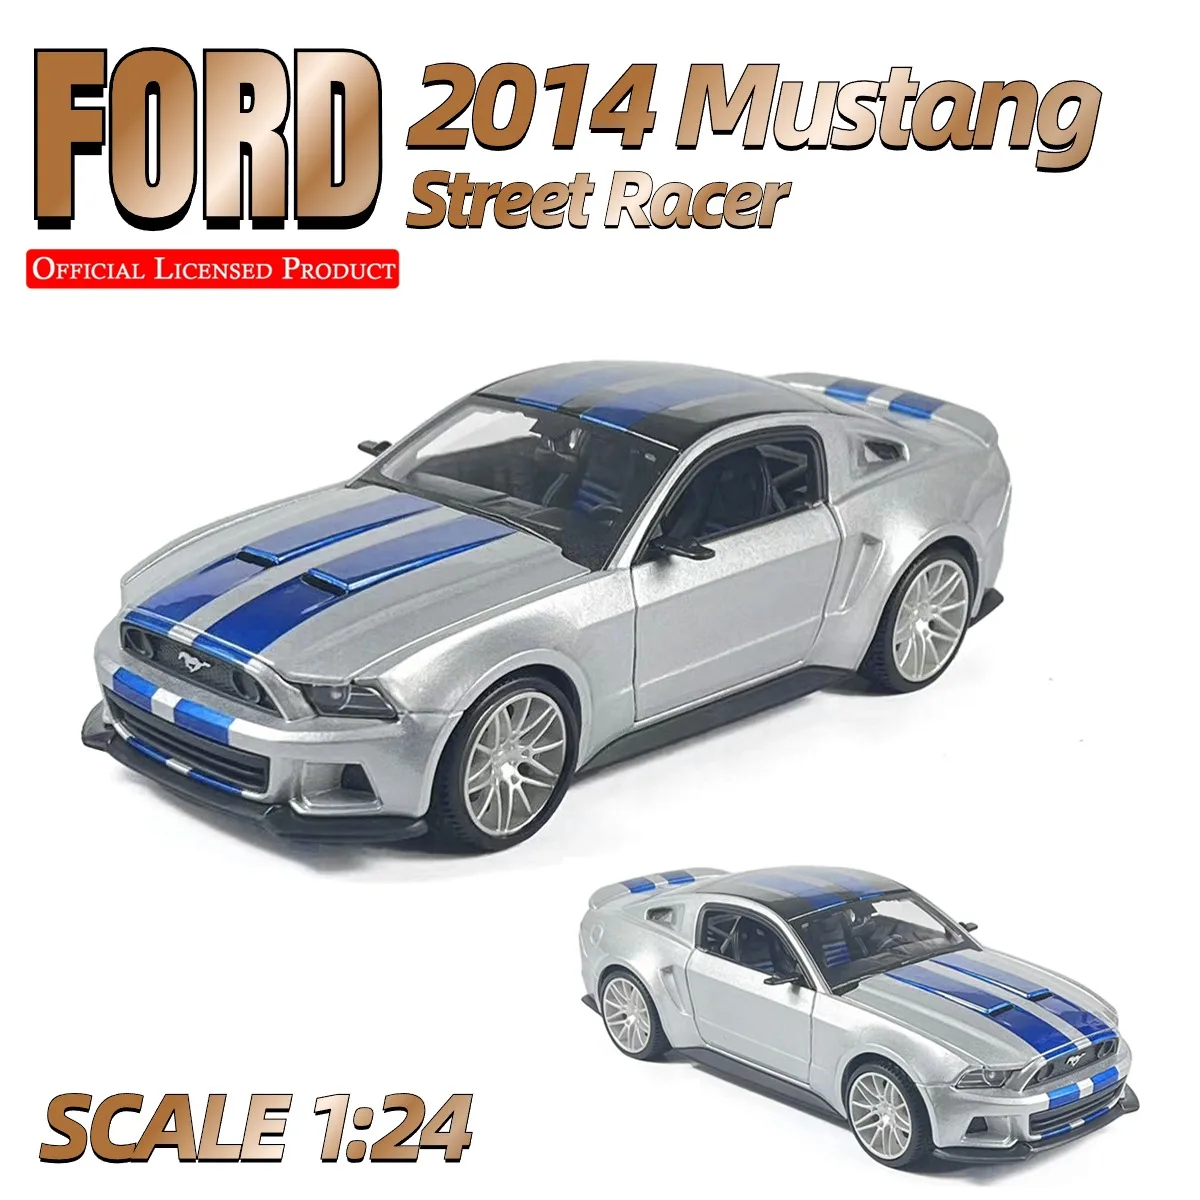 

1:24 2014 Ford Mustang Street Racer Car Model Diecast Replica Home Office Decorative Scale Miniature Art Collection Gift Boy Toy